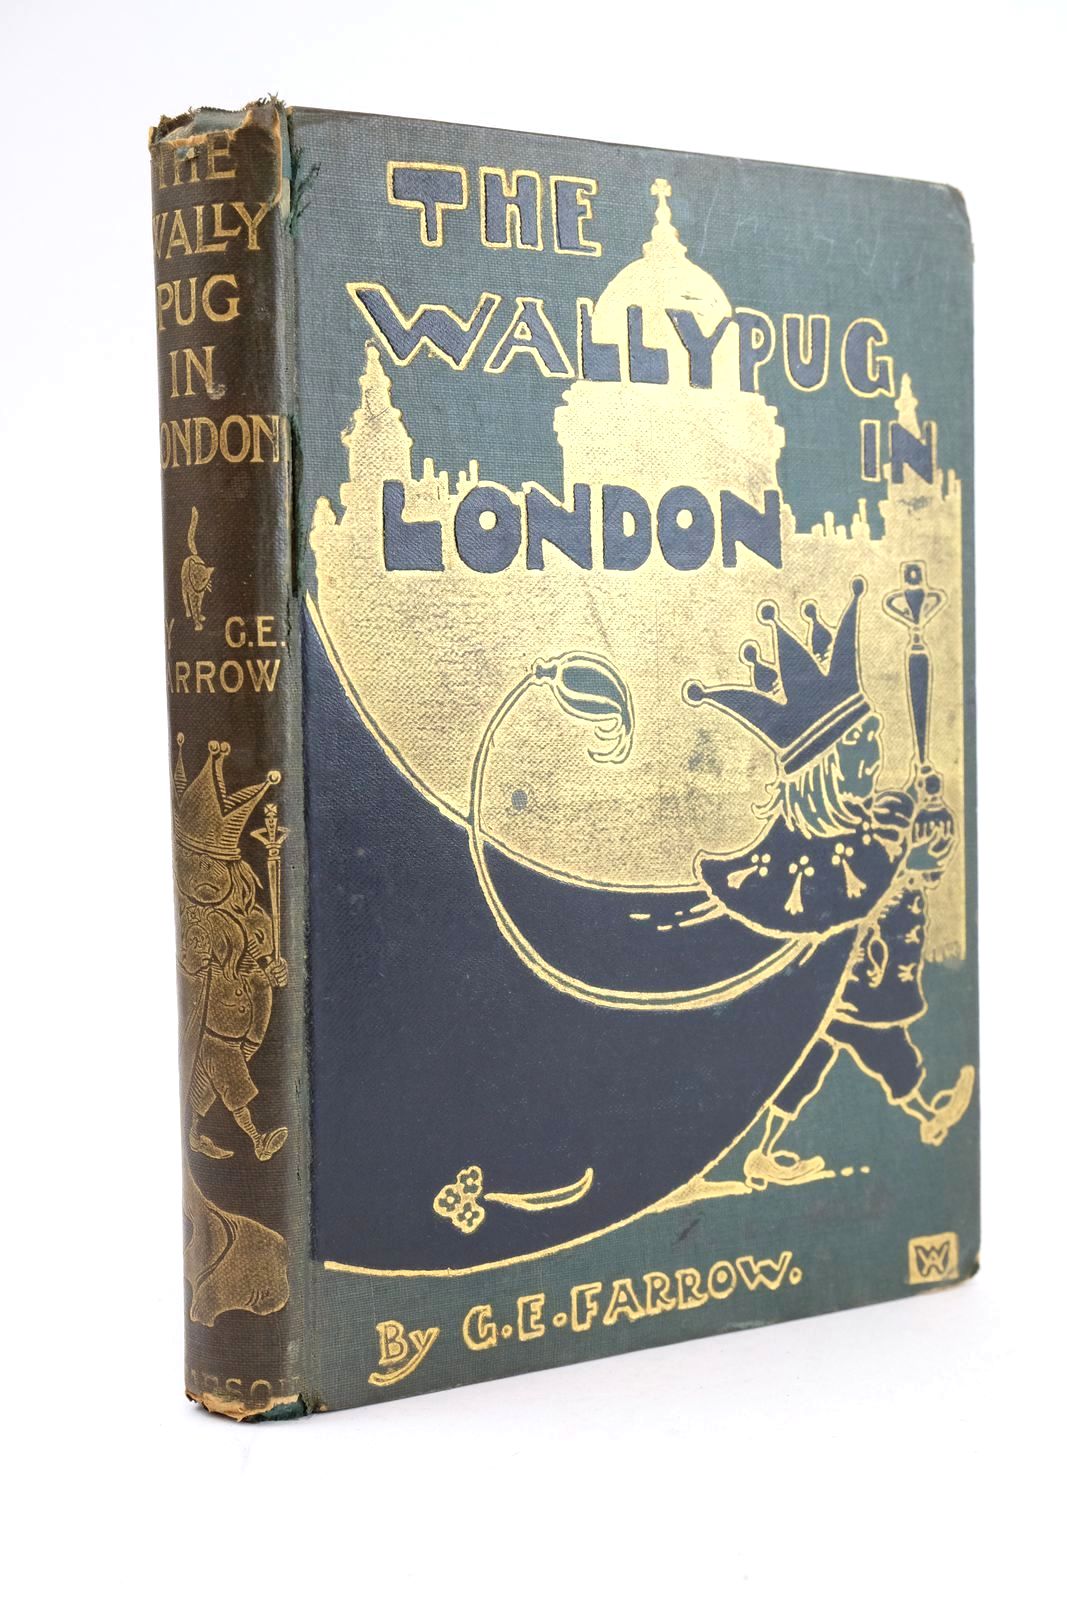 Photo of THE WALLYPUG IN LONDON written by Farrow, G.E. illustrated by Wright, Alan published by C. Arthur Pearson Ltd. (STOCK CODE: 1325257)  for sale by Stella & Rose's Books